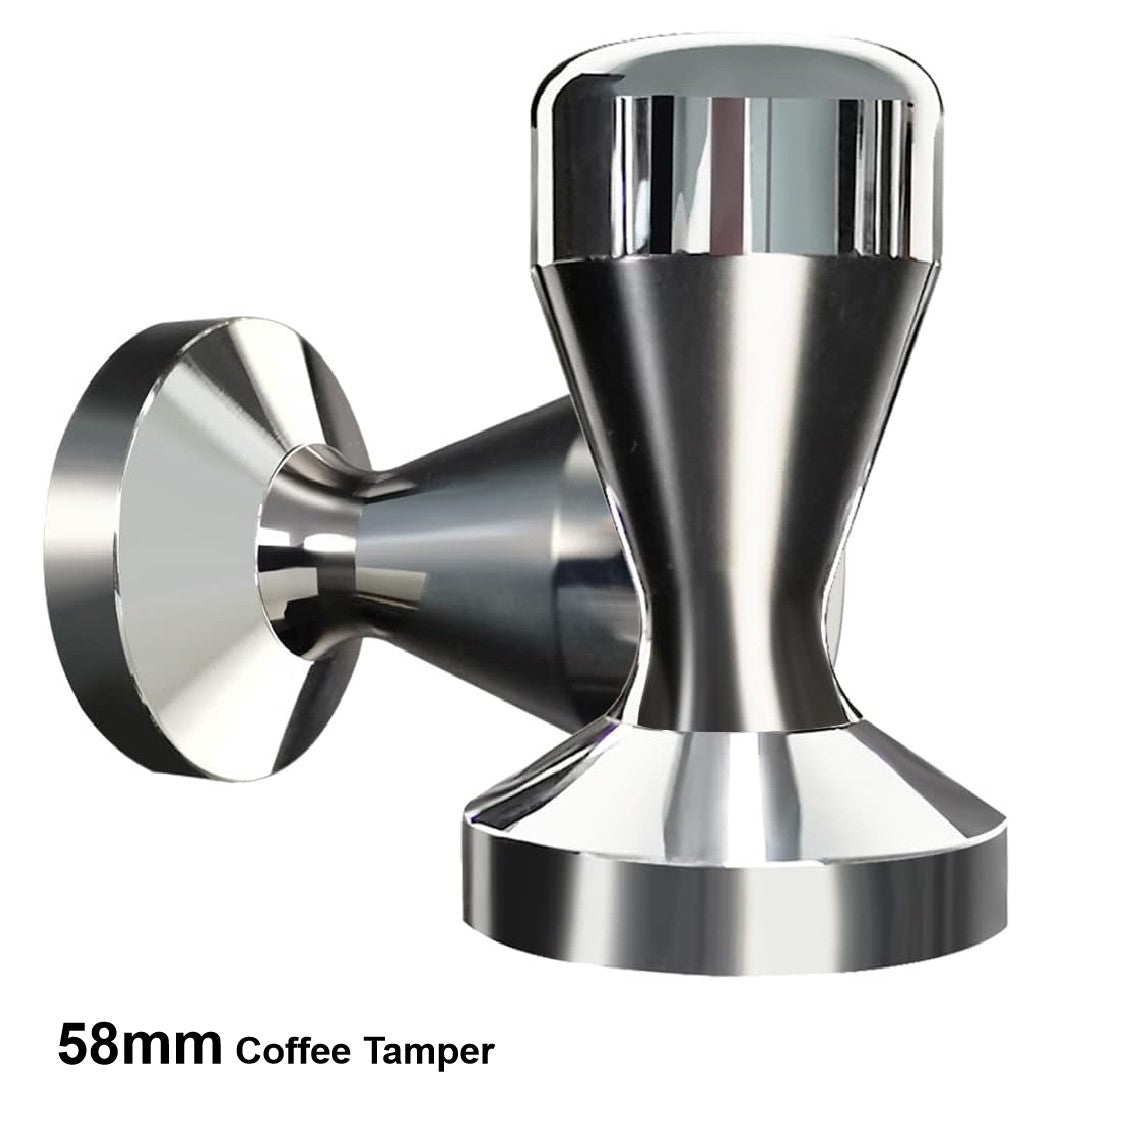 We are proud to treat each customer like family. Finding the Solid Steel  Coffee Tamper - 58mm Rampant Cake & Party for people is our passion